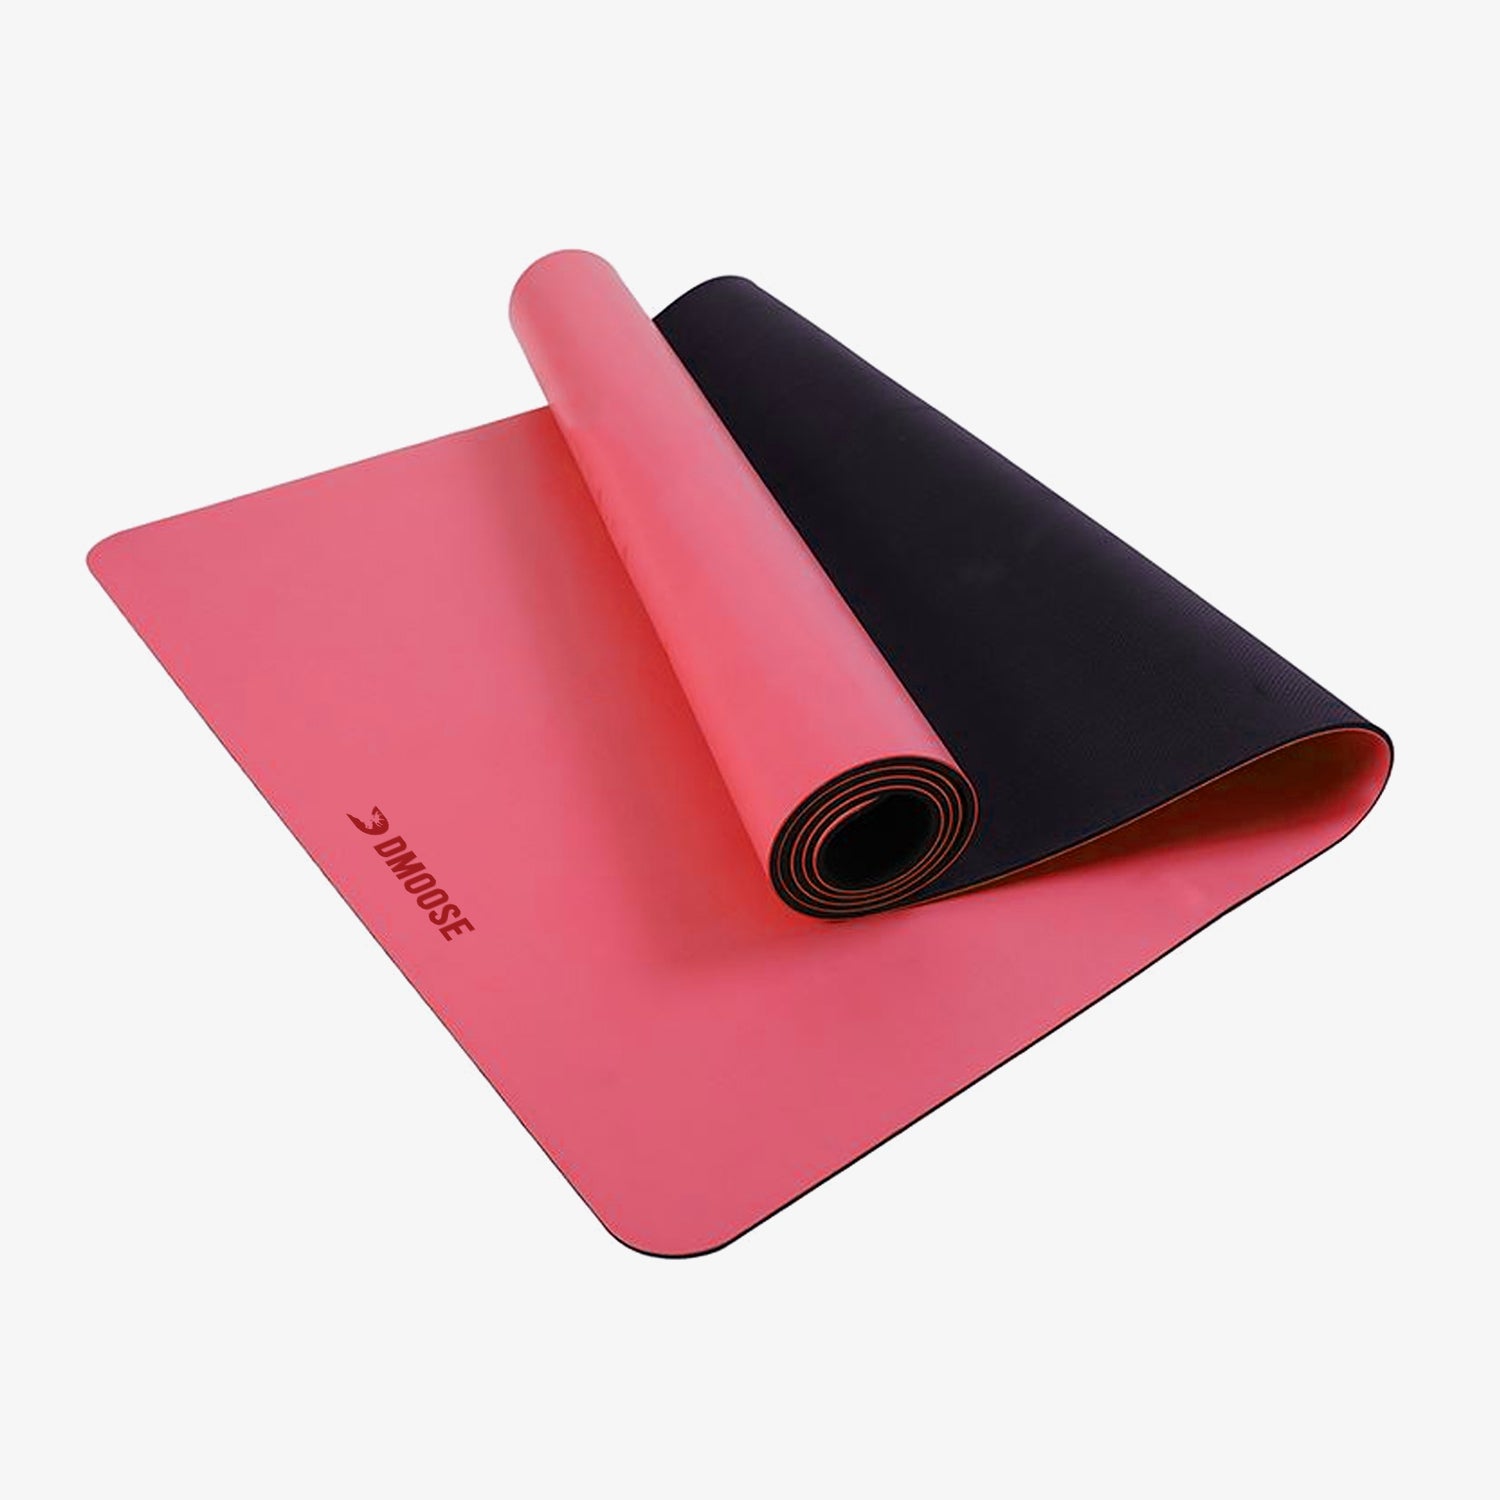 Yoga Mat - Non Slip & Thick Mat for Yoga Workouts